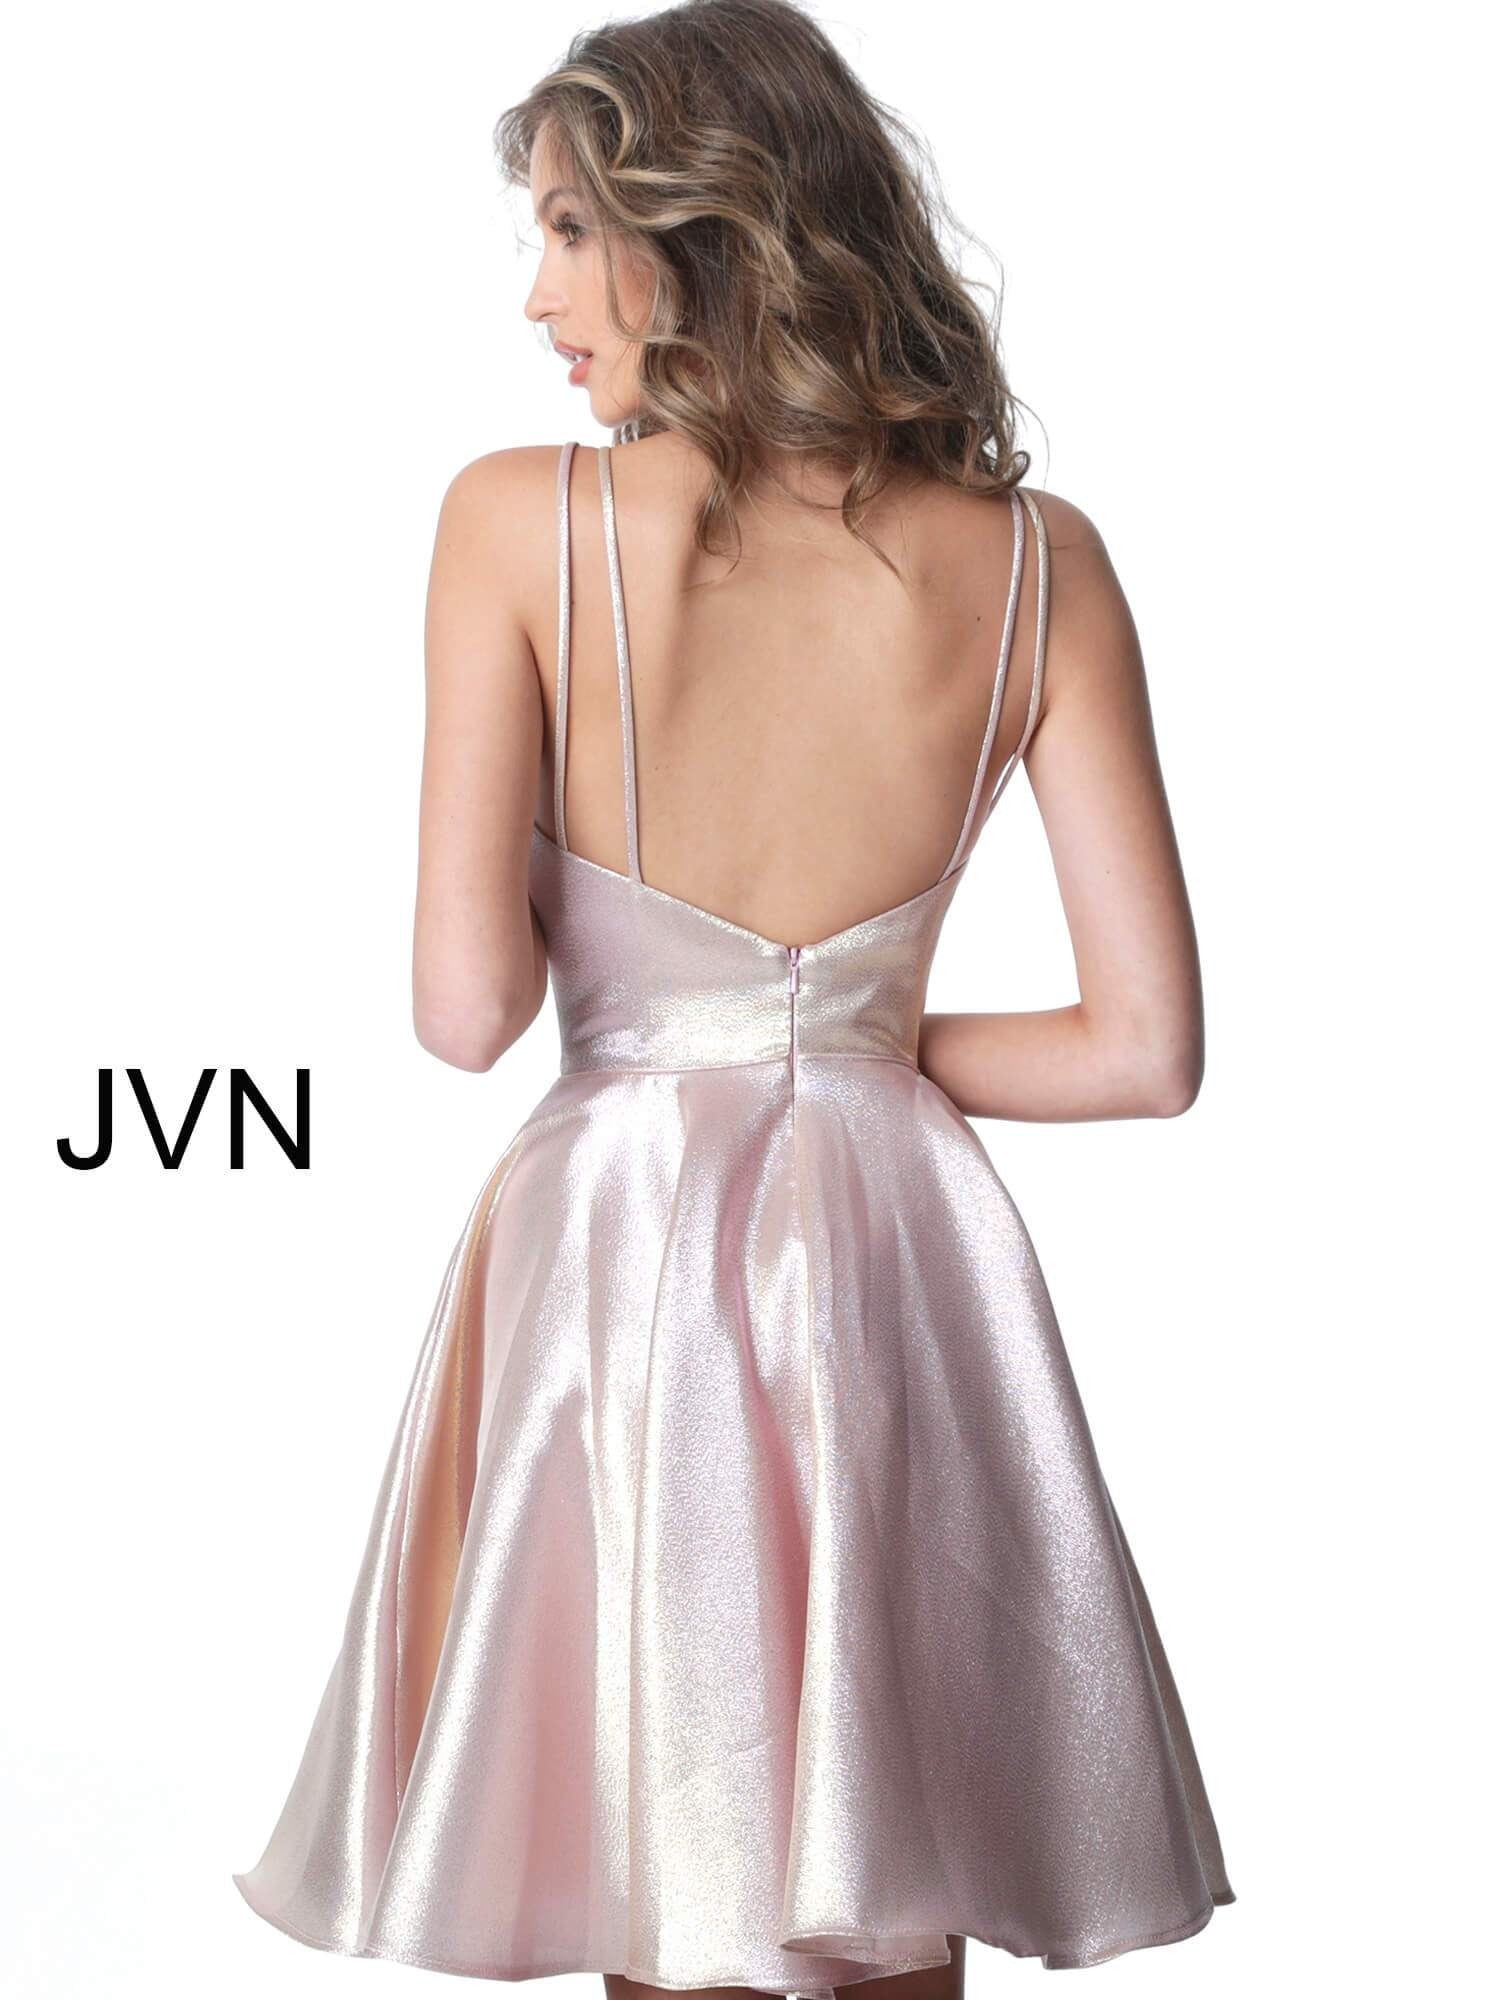 JVN3780 JVN by Jovani 3780 is a metallic shimmer Fit and Flare Short Prom Dress and  Homecoming Dress. criss cross strap neckline fit and flare cocktail dress